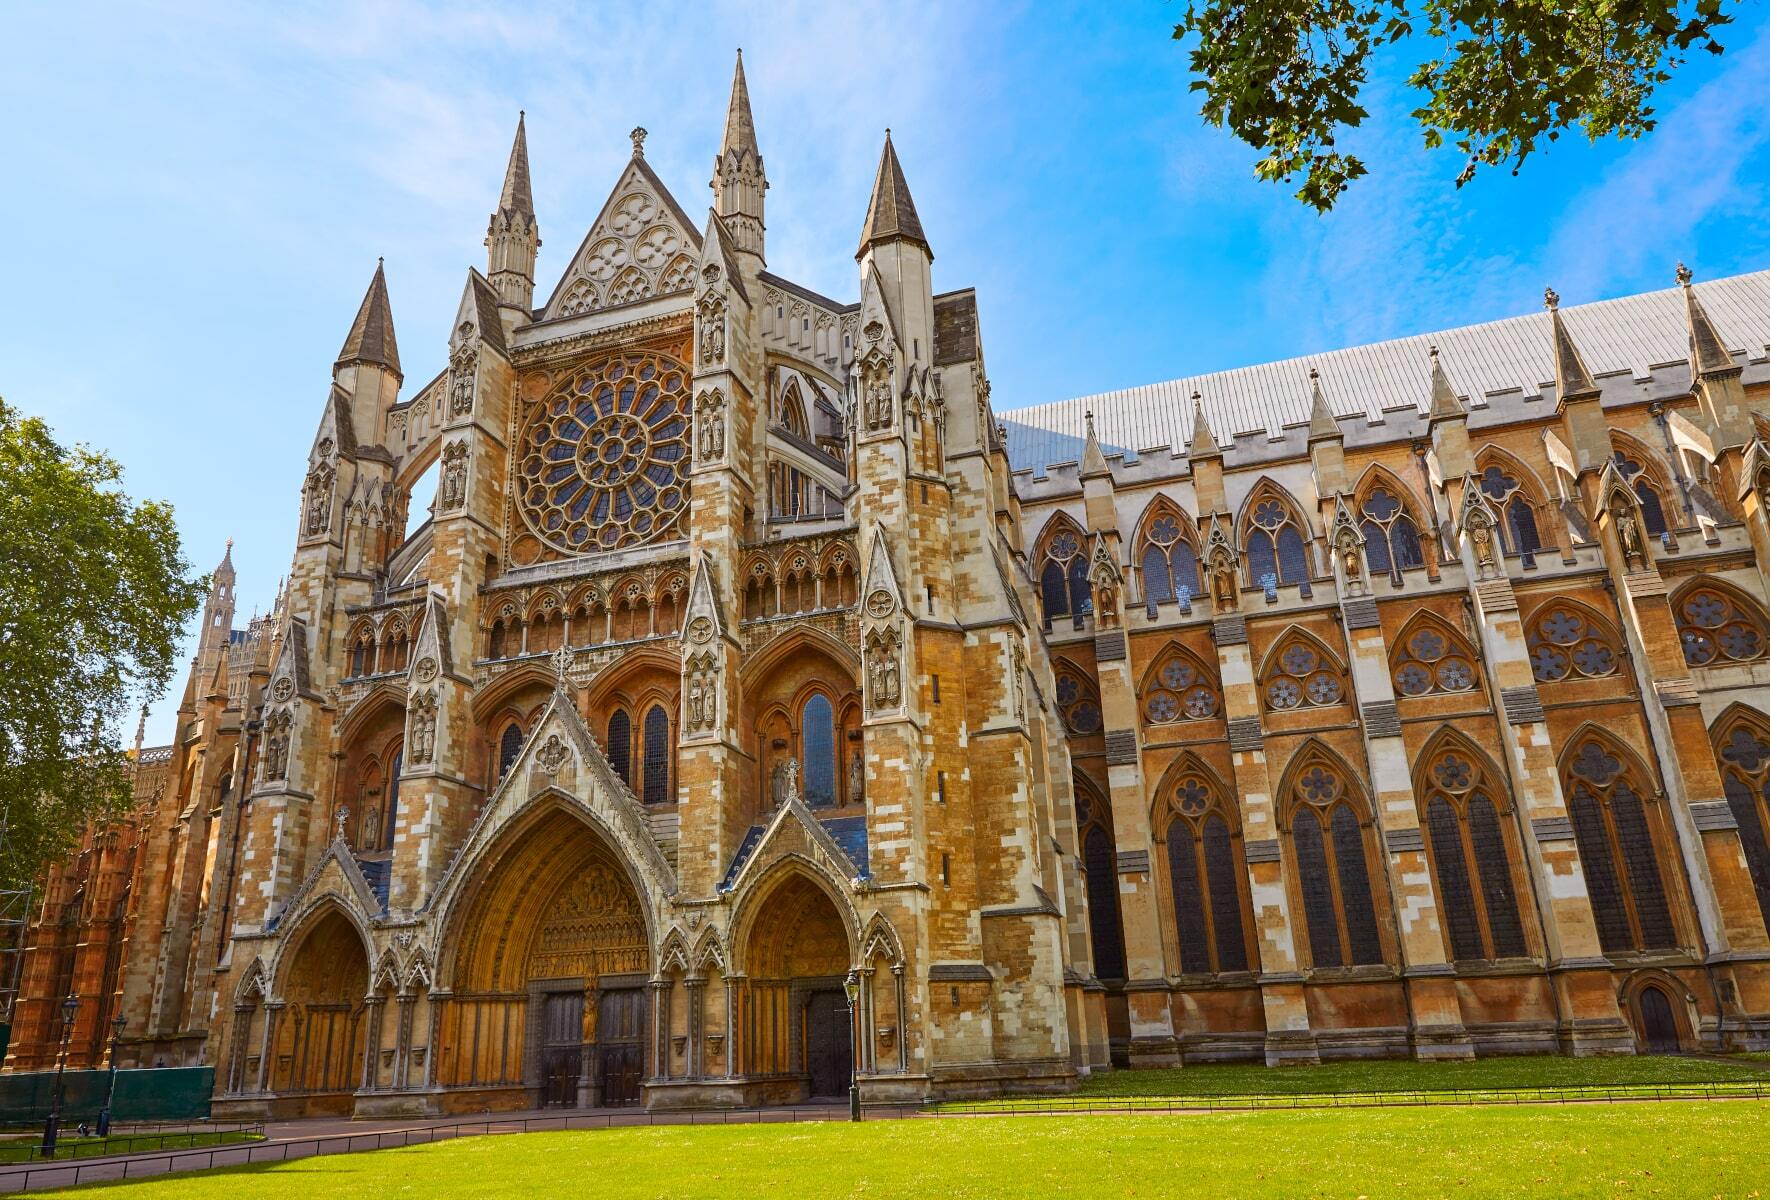 <p>The setting for every coronation since 1066, <a href="https://www.westminster-abbey.org/" class="atom_link atom_valid" rel="noreferrer noopener">Westminster Abbey</a> is also the final resting place of some of England’s most revered kings and queens as well as more than 3,000 Britons who’ve had an impact on the country, including Sir Isaac Newton, Elizabeth I, Charles Dickens, and Stephen Hawking.</p>